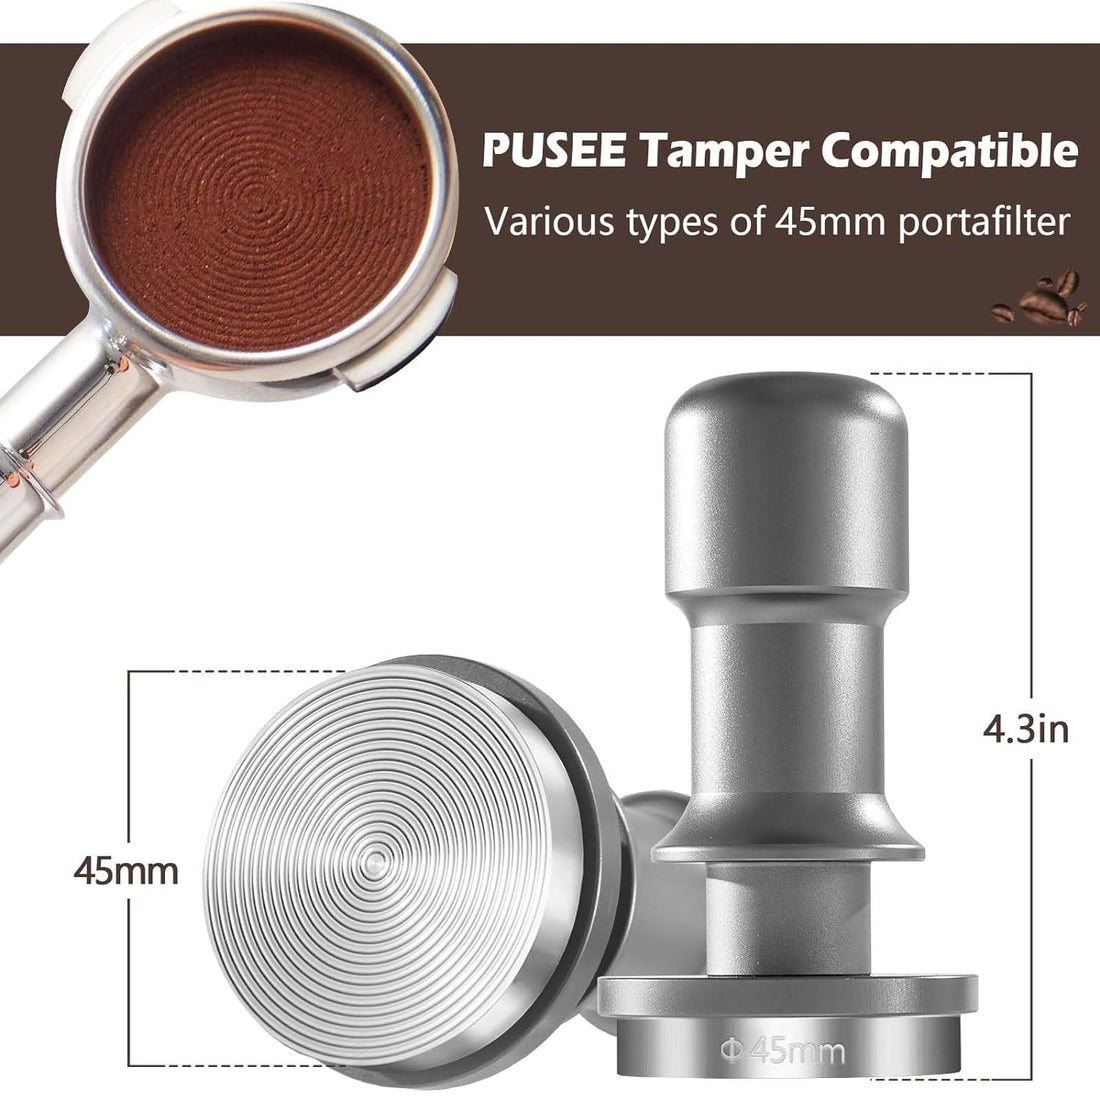 PUSEE 45mm Espresso Coffee Tamper,Premium 30lb Calibrated Espresso Tamper Upgrade Coffee Tamper with Spring Loaded,100% Stainless Steel Ground Tamper for Barista Home Coffee Espresso Accessories